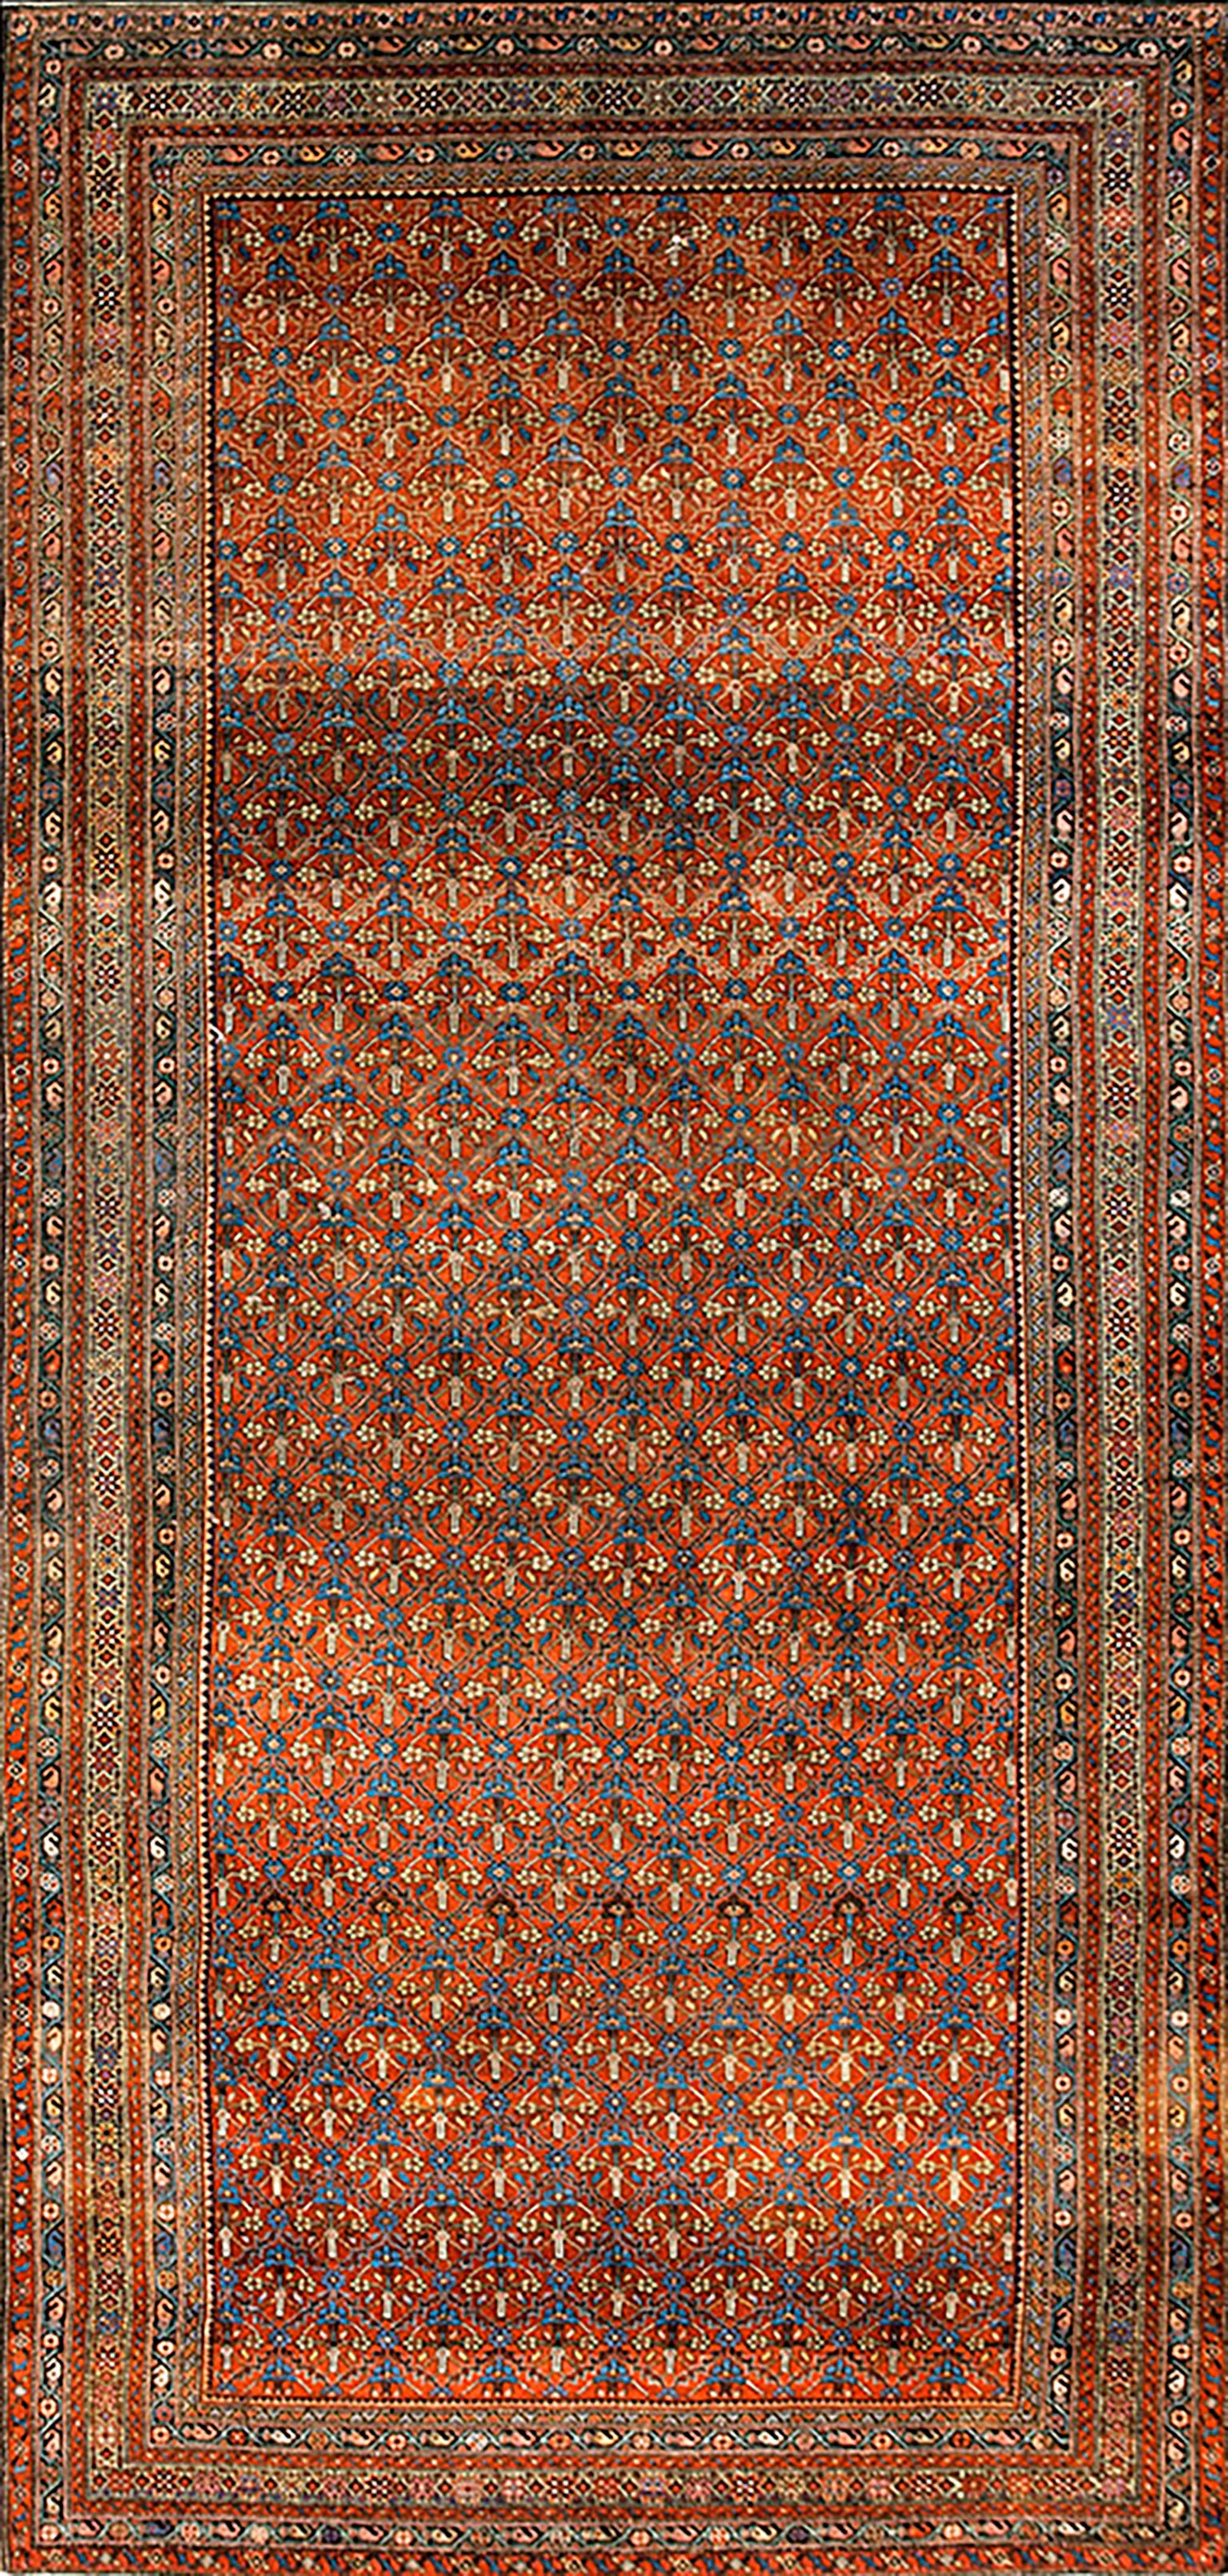 Early 20th Century N.W. Persian Gallery Carpet ( 6' x 13' - 183 x 396 ) For Sale